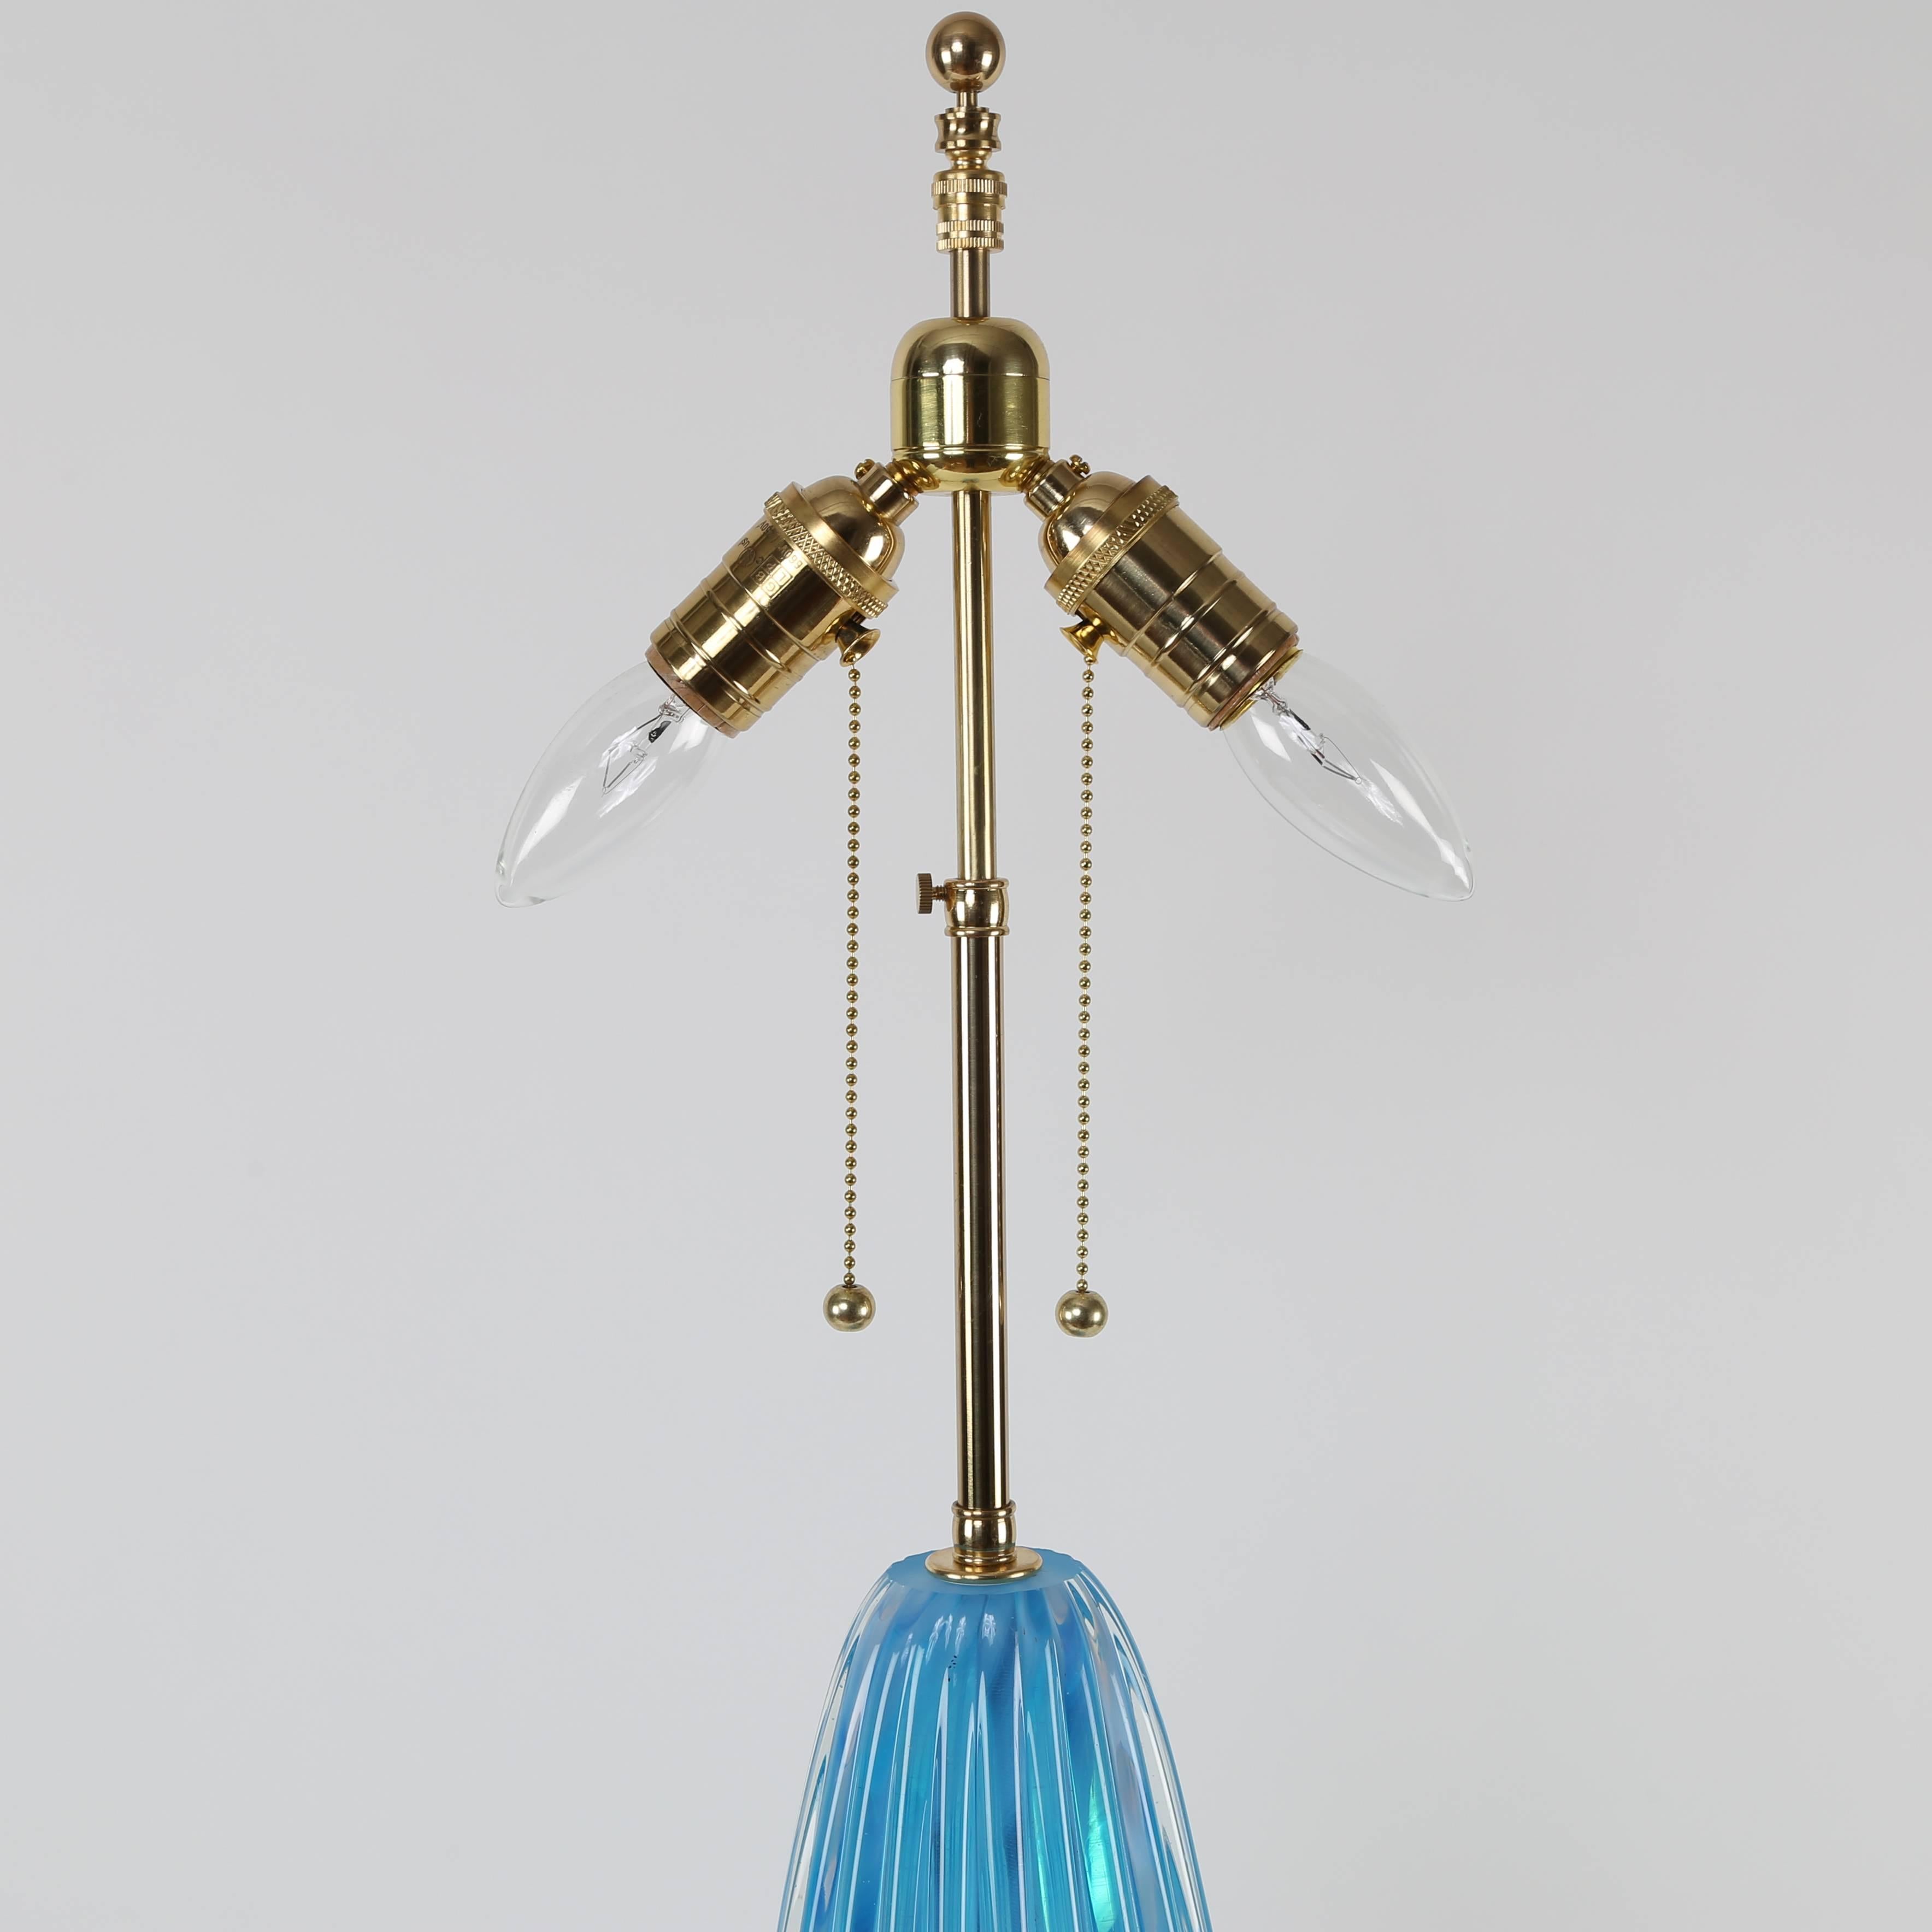 Lovely vivid-blue Murano glass table lamp with gilded base, circa 1950s. New polished-brass hardware with two pull-chain sockets and new wiring. Base is 6-1/2